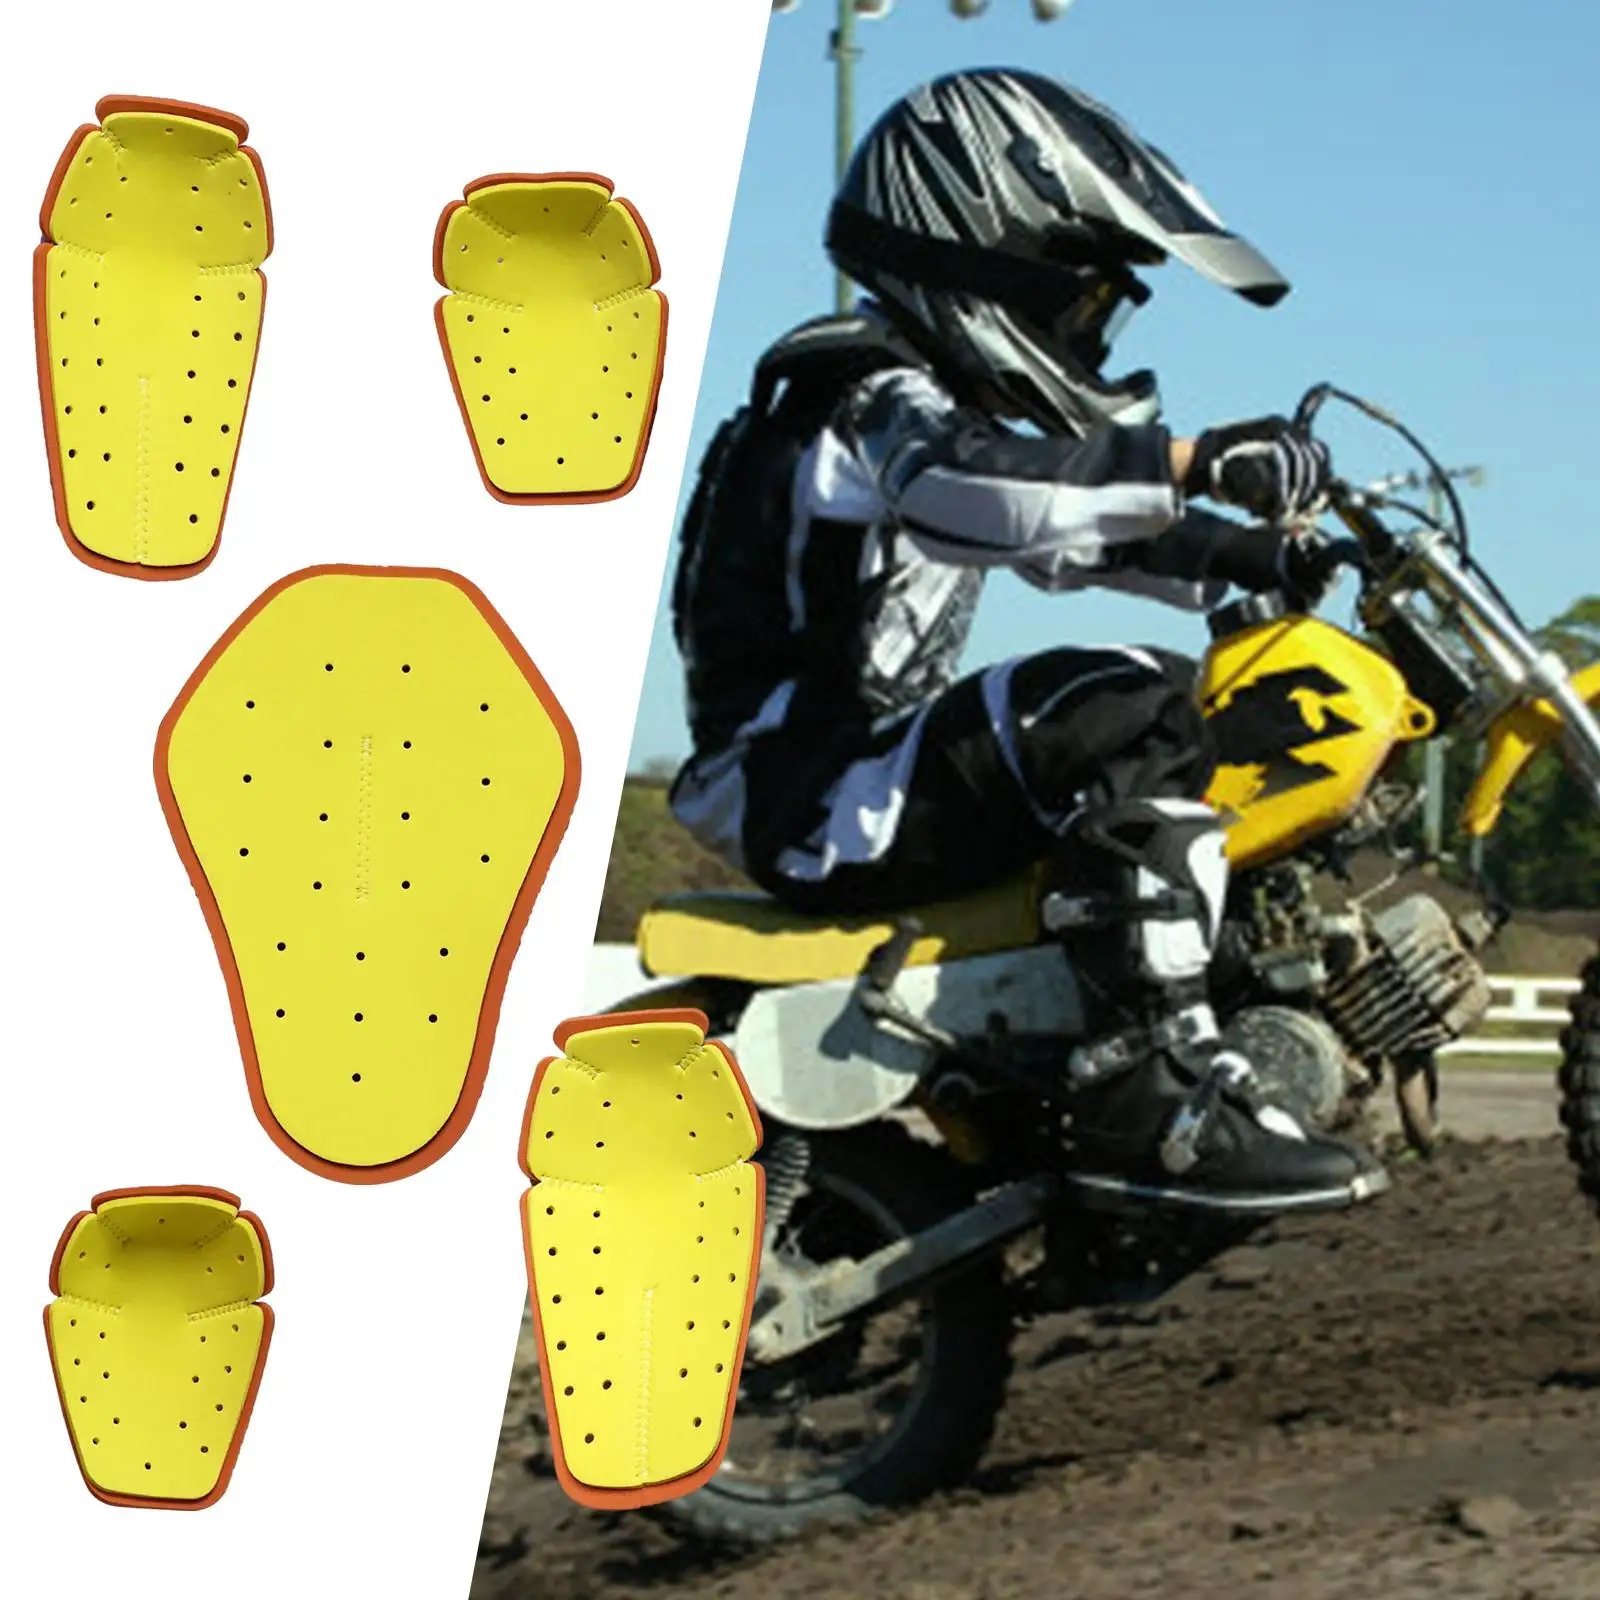 Motorbike Body Protective Gear, Motorcycle Riding Motorcycle